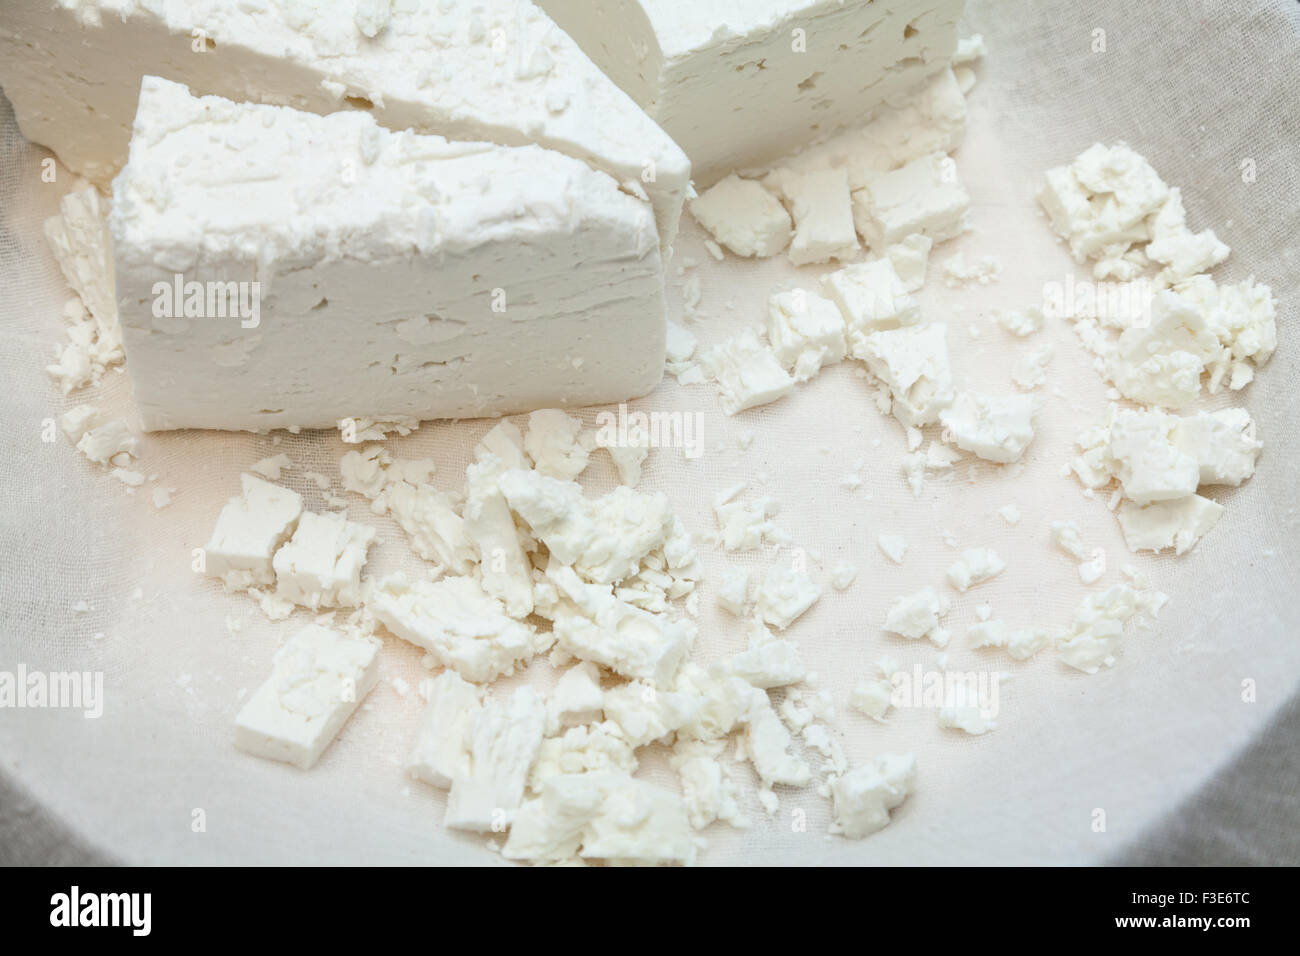 Cheese products : Raw soft Mediterranean feta white cheese cubes and round on white fabric in plate. Stock Photo